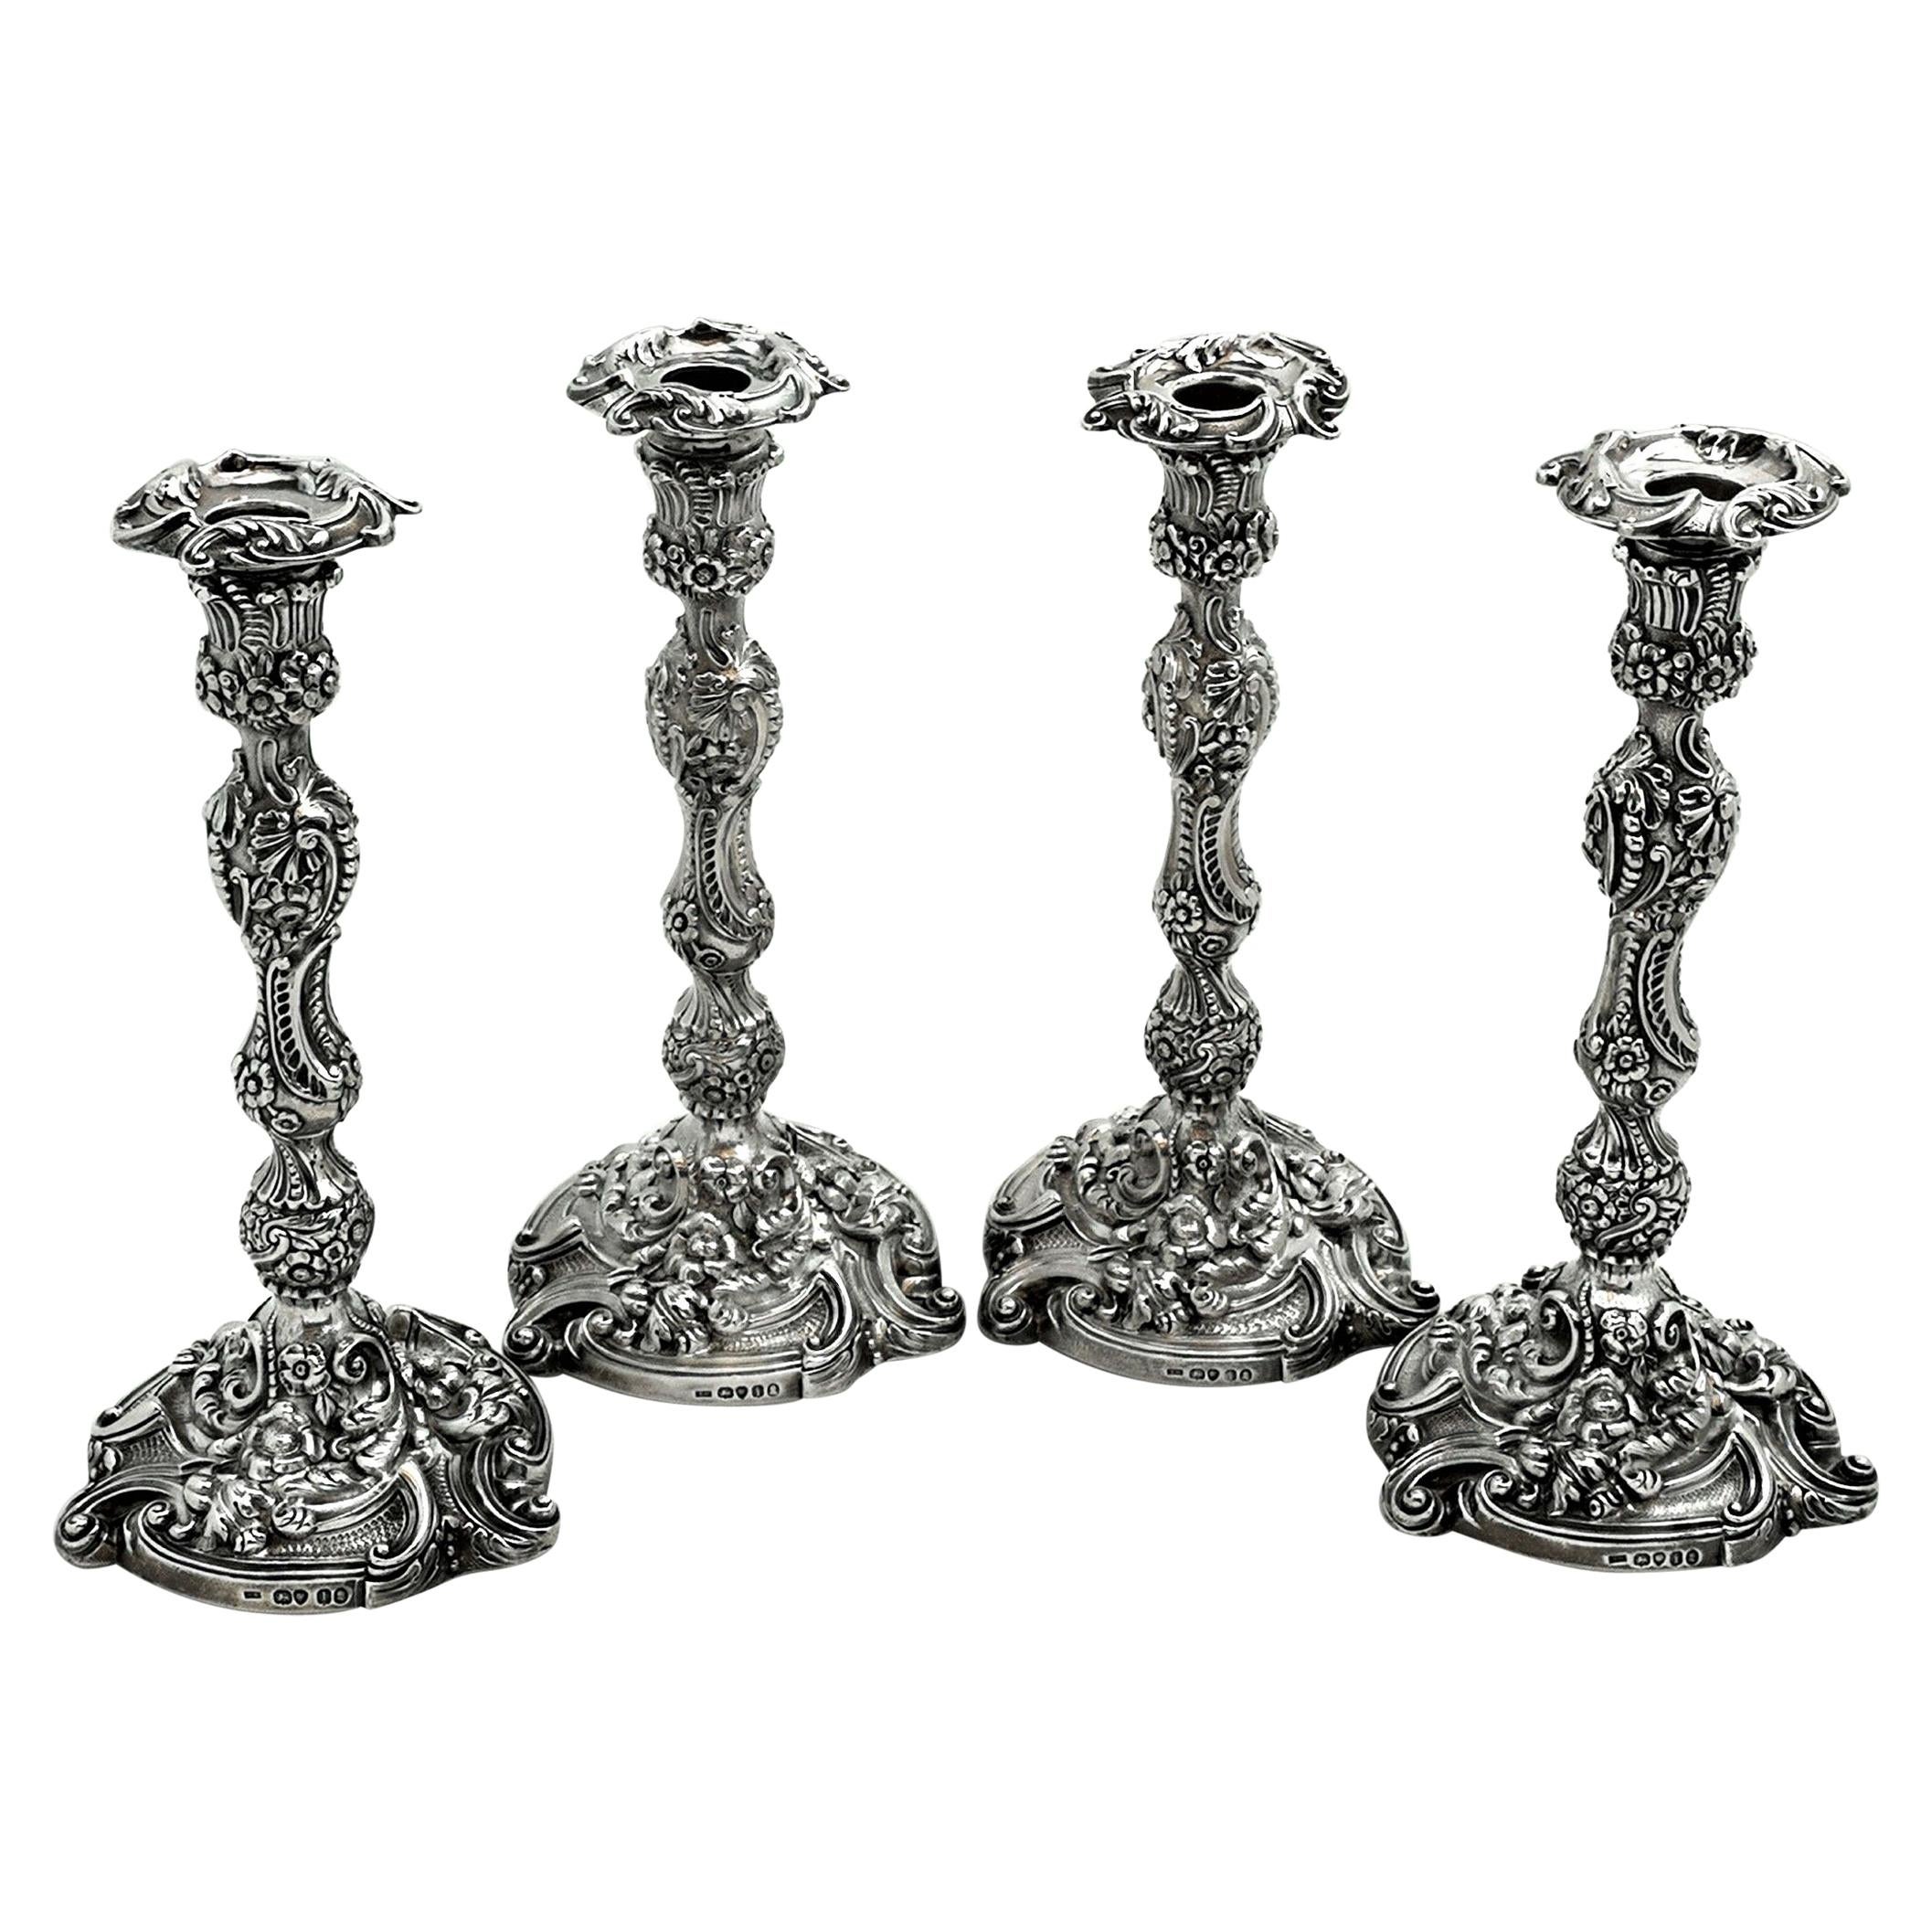 Set of 4 Georgian Sterling Silver Candlesticks 1824 George IV Candle Holders